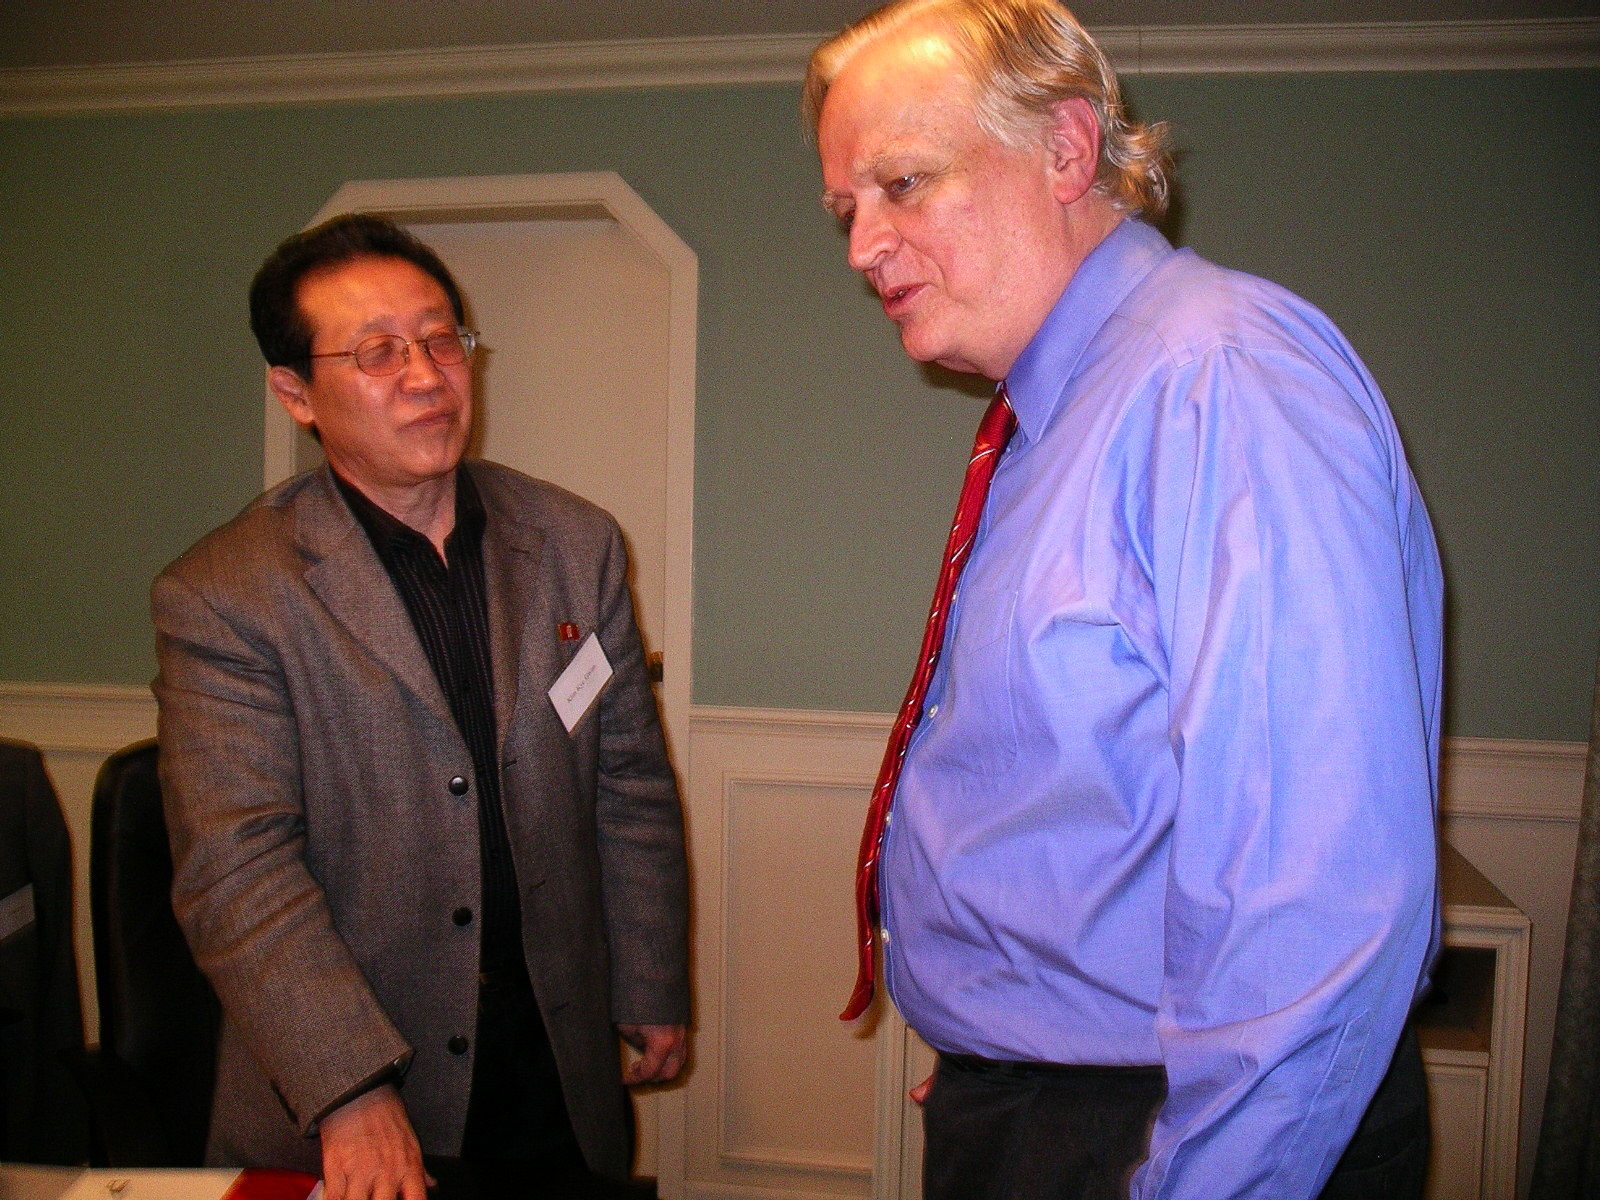 Man in blue dress shirt and tie talking to man in black shirt and jacket